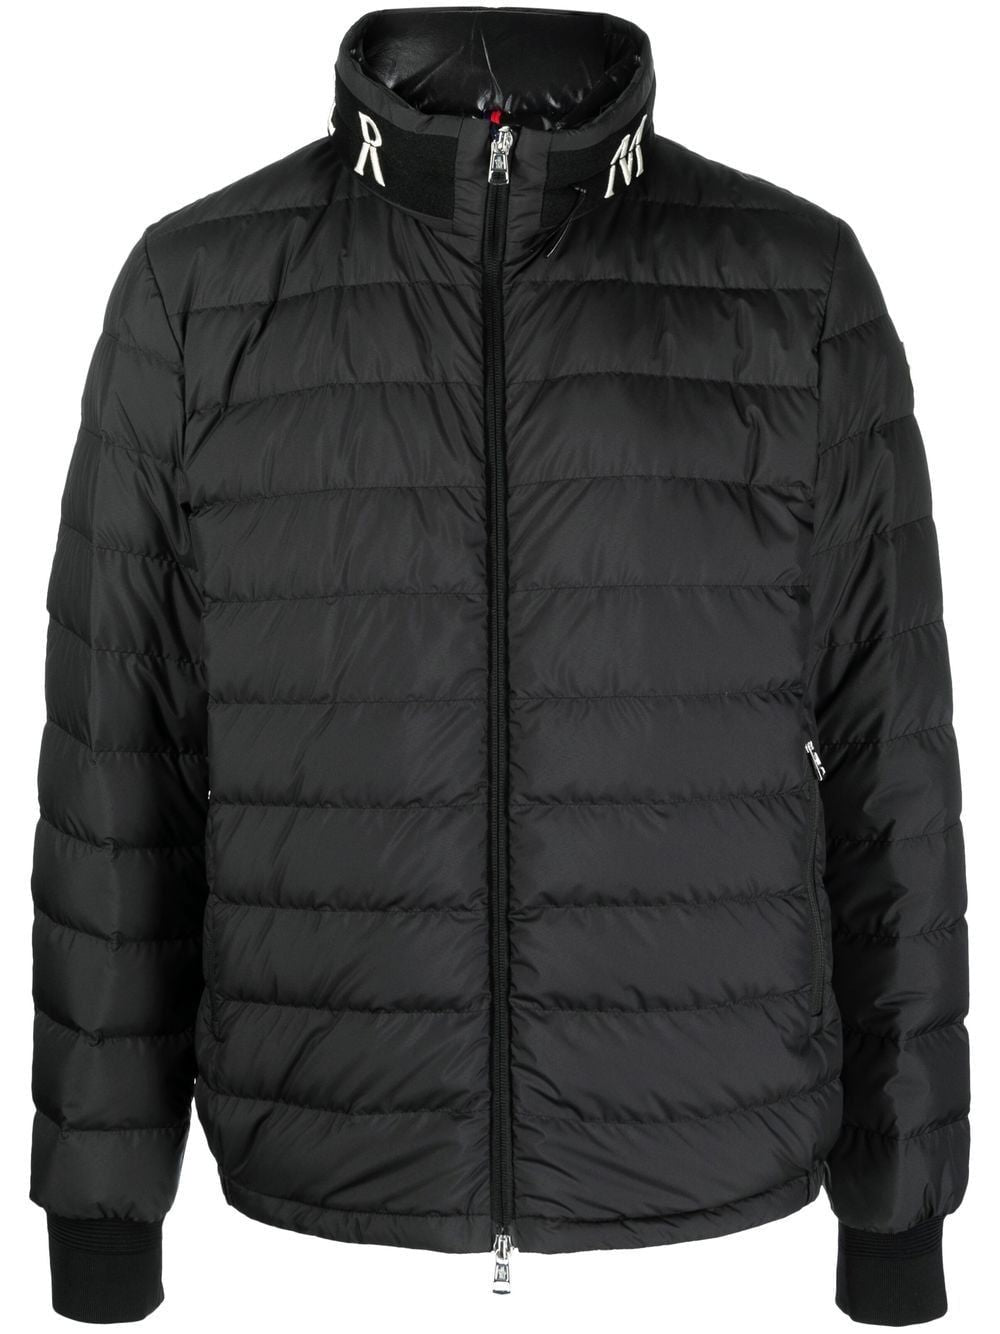 MONCLER Colorful Men's Carryover Jacket for the Fashion-Forward